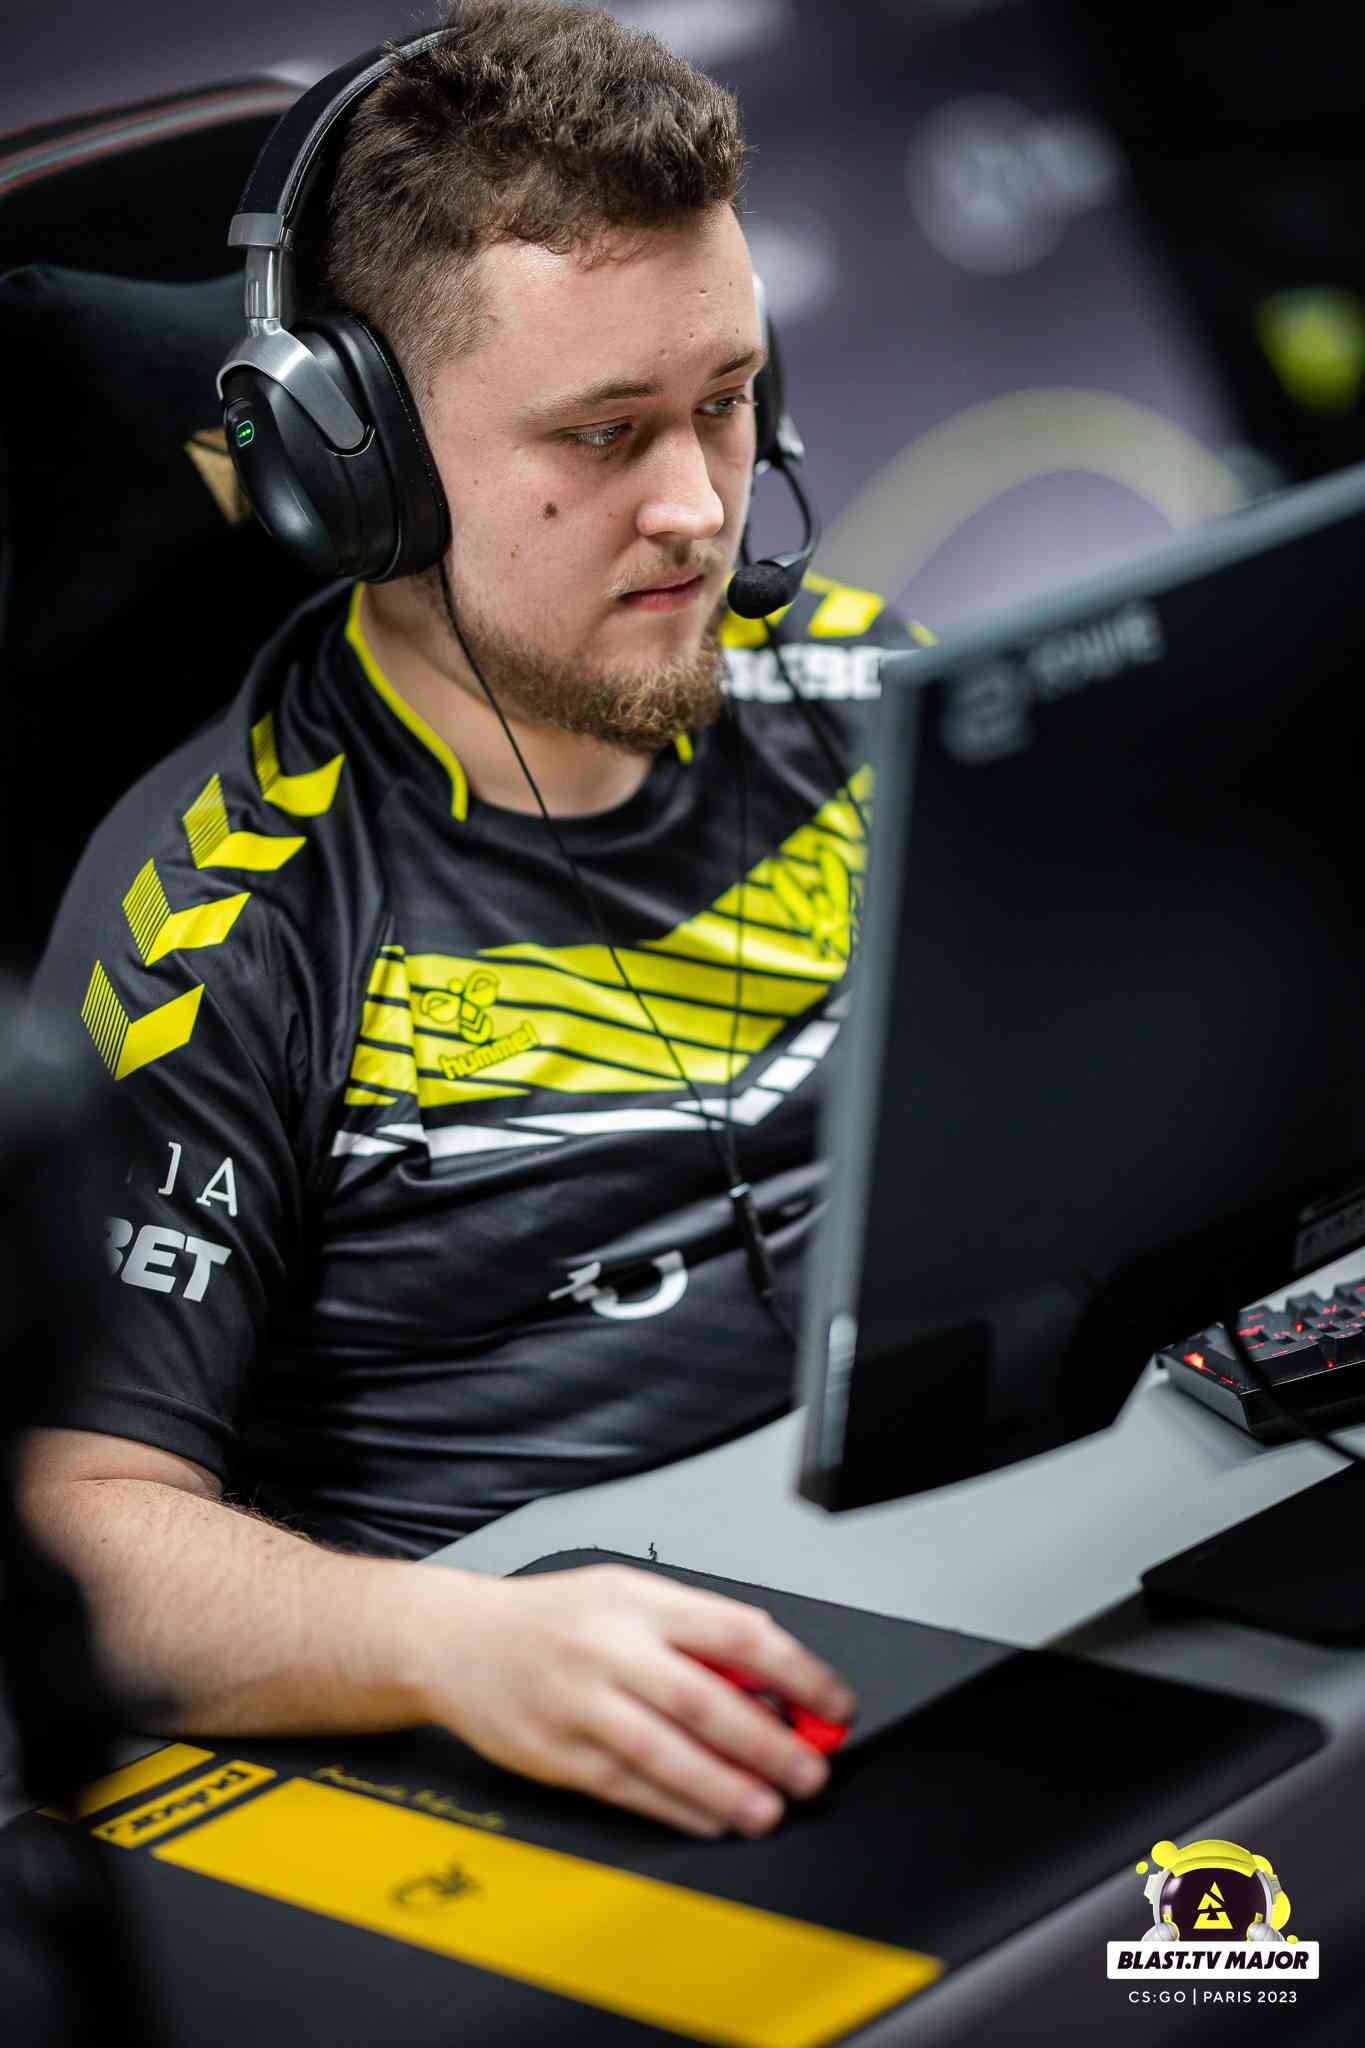 ZywOo competes in the EU RMR B for the BLAST Paris Major 2023